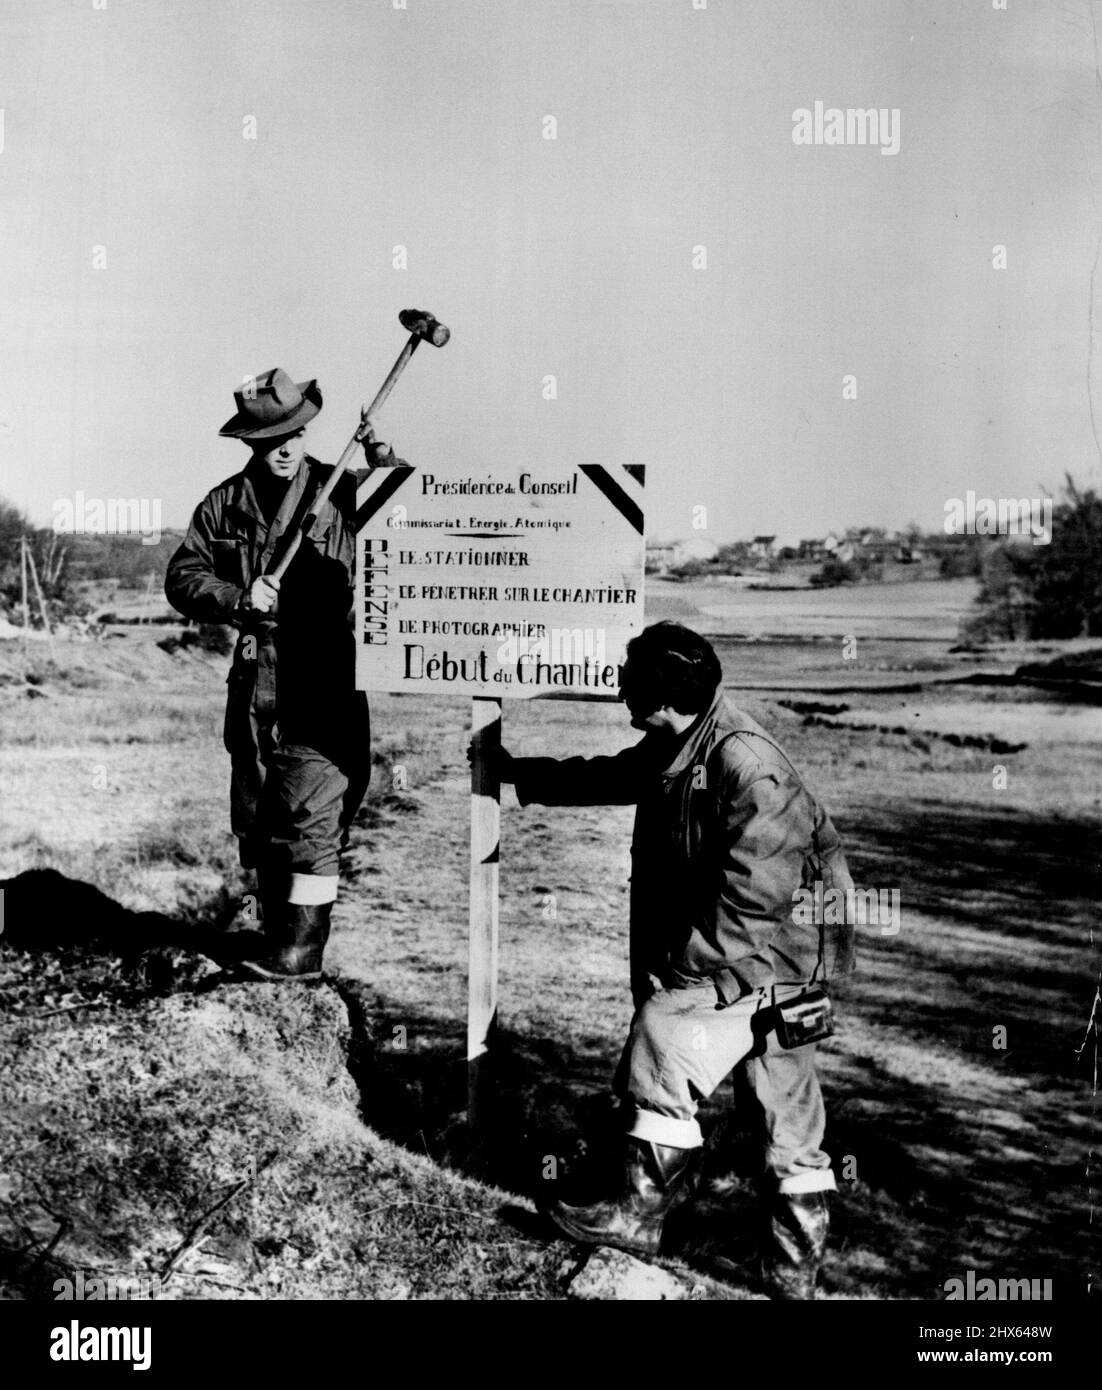 Uranium Strike - Two of the young prospectors post a sign at the boundary of the French uranium diggings. By authority of the French Atomic Energy Commission, the notice for bids entry, loitering and photography of the area. March 18, 1949. (Photo by ACME Roto Service). Stock Photo